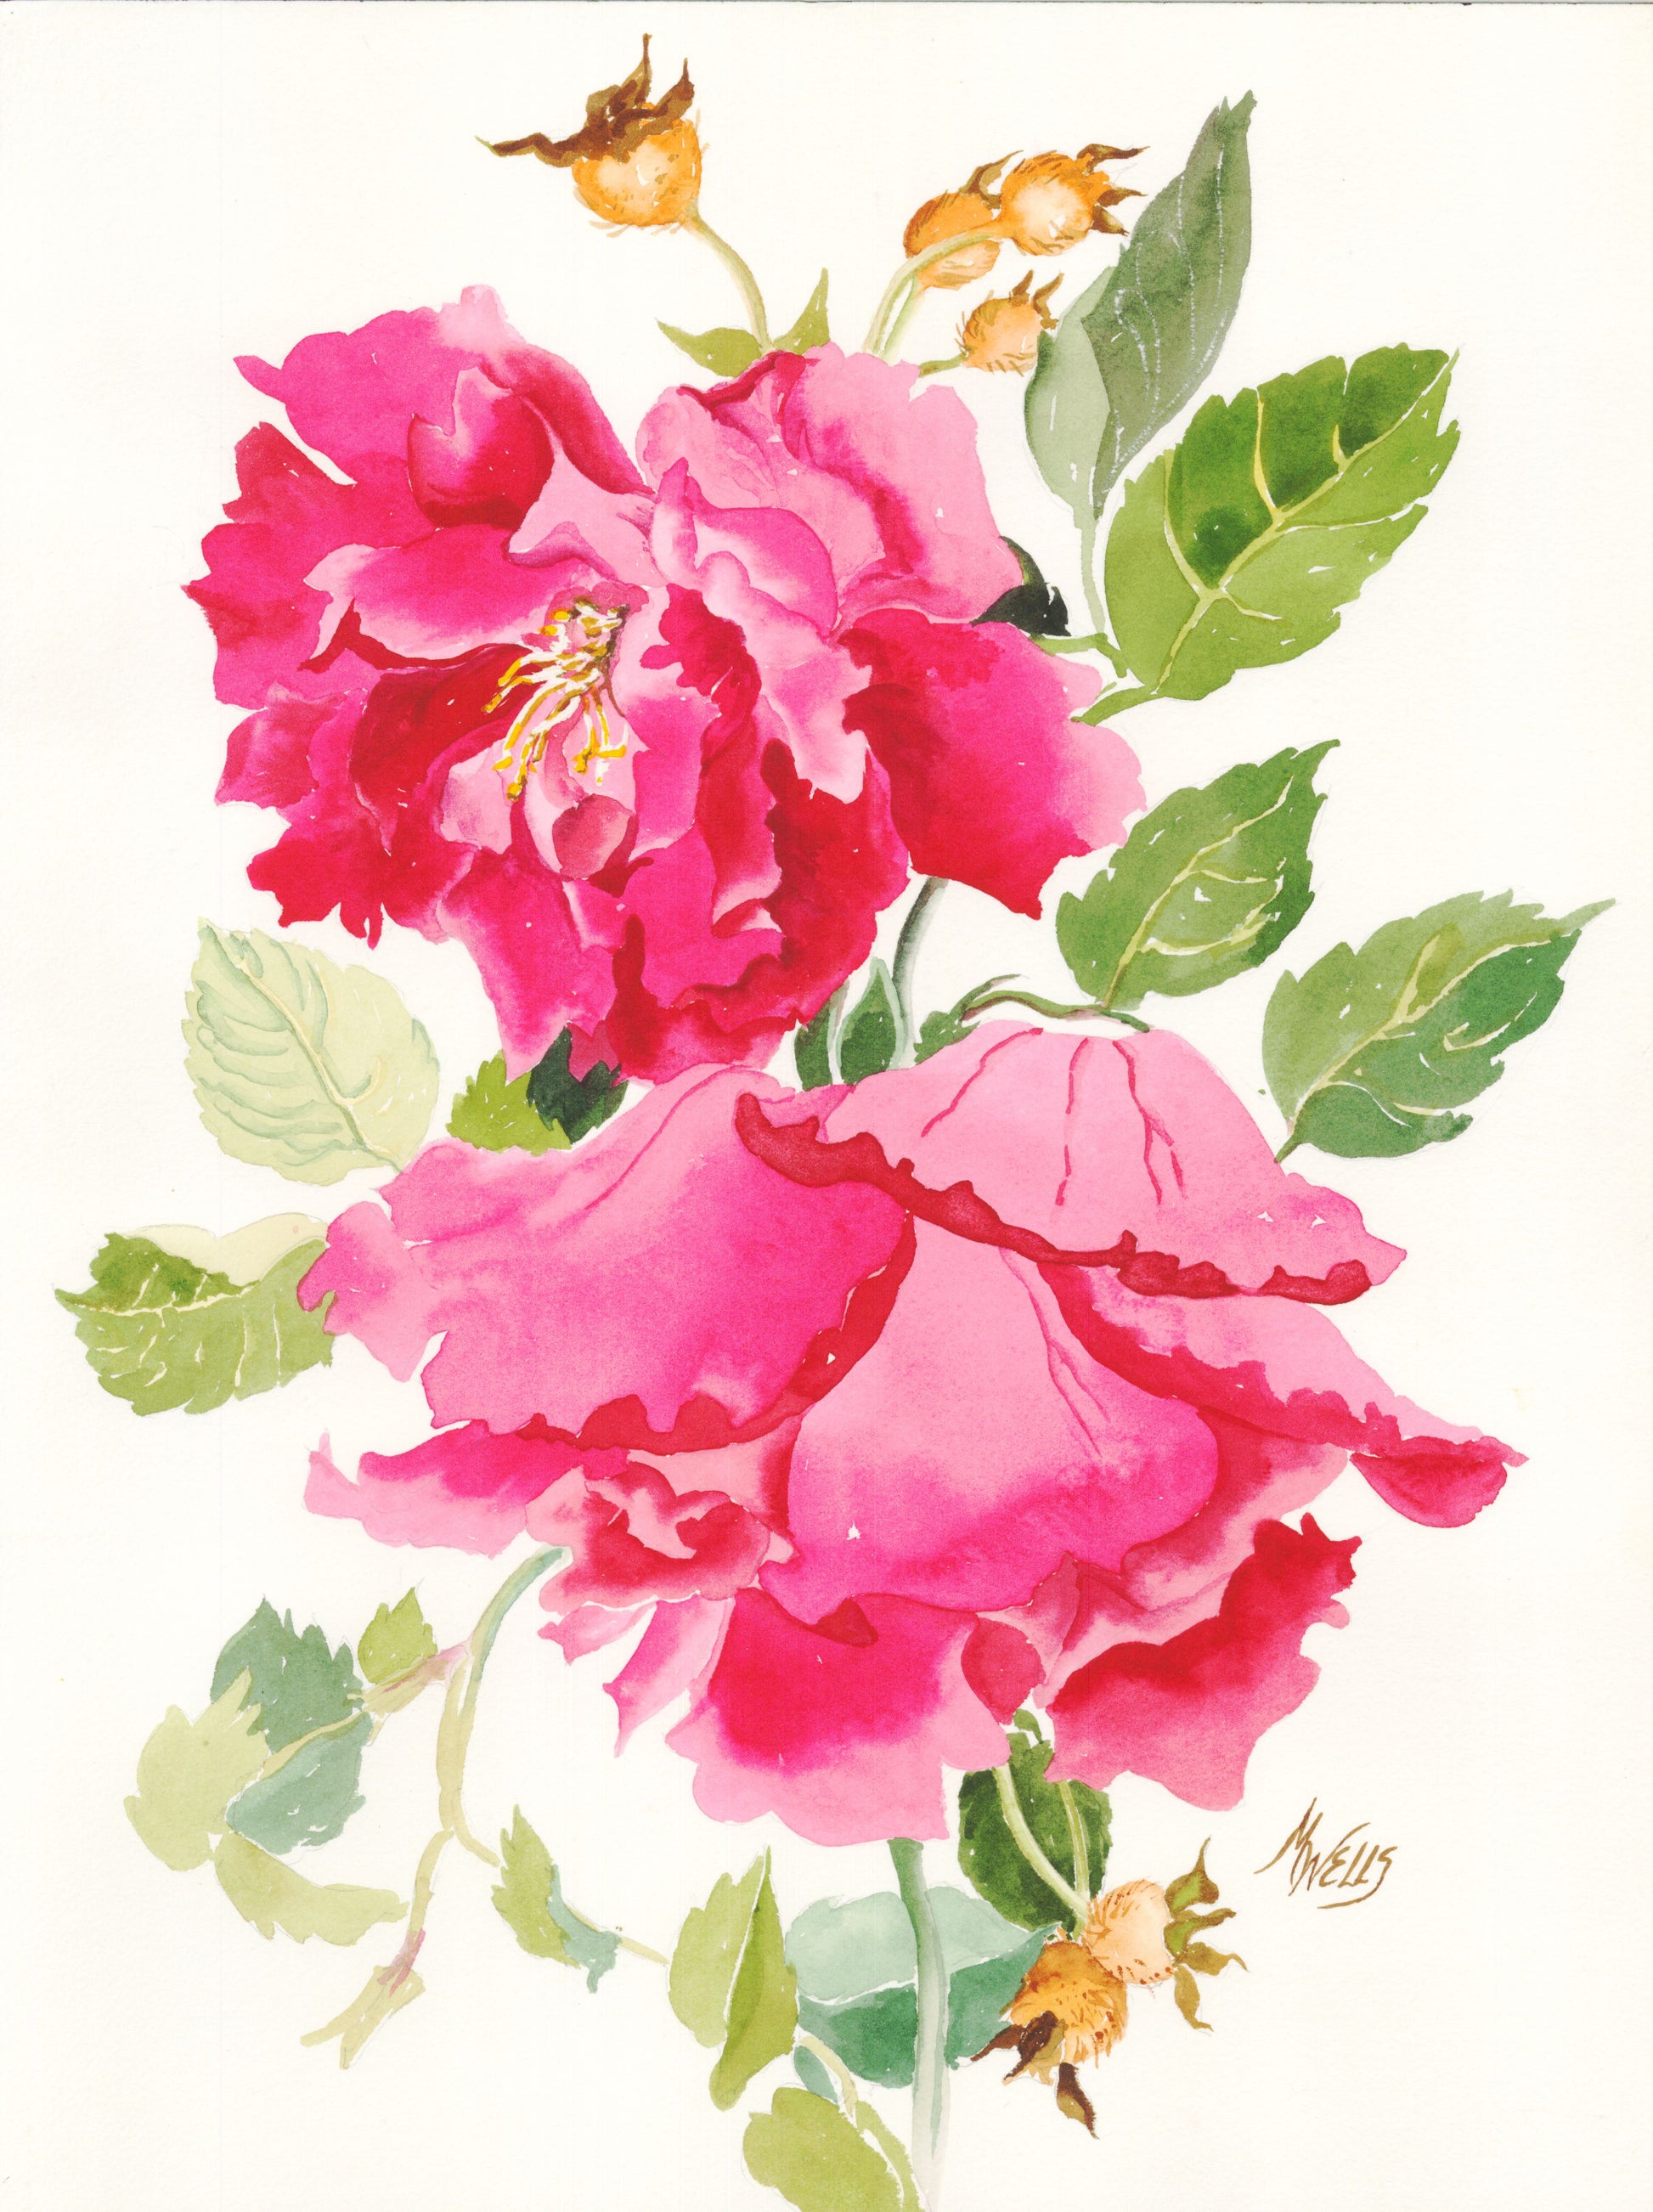 watercolor painting in reds and pinks of "Cuthbert Grant" rose, a Canadian cultivar, in semi botanical style by Marilyn Wells 12" x 16"